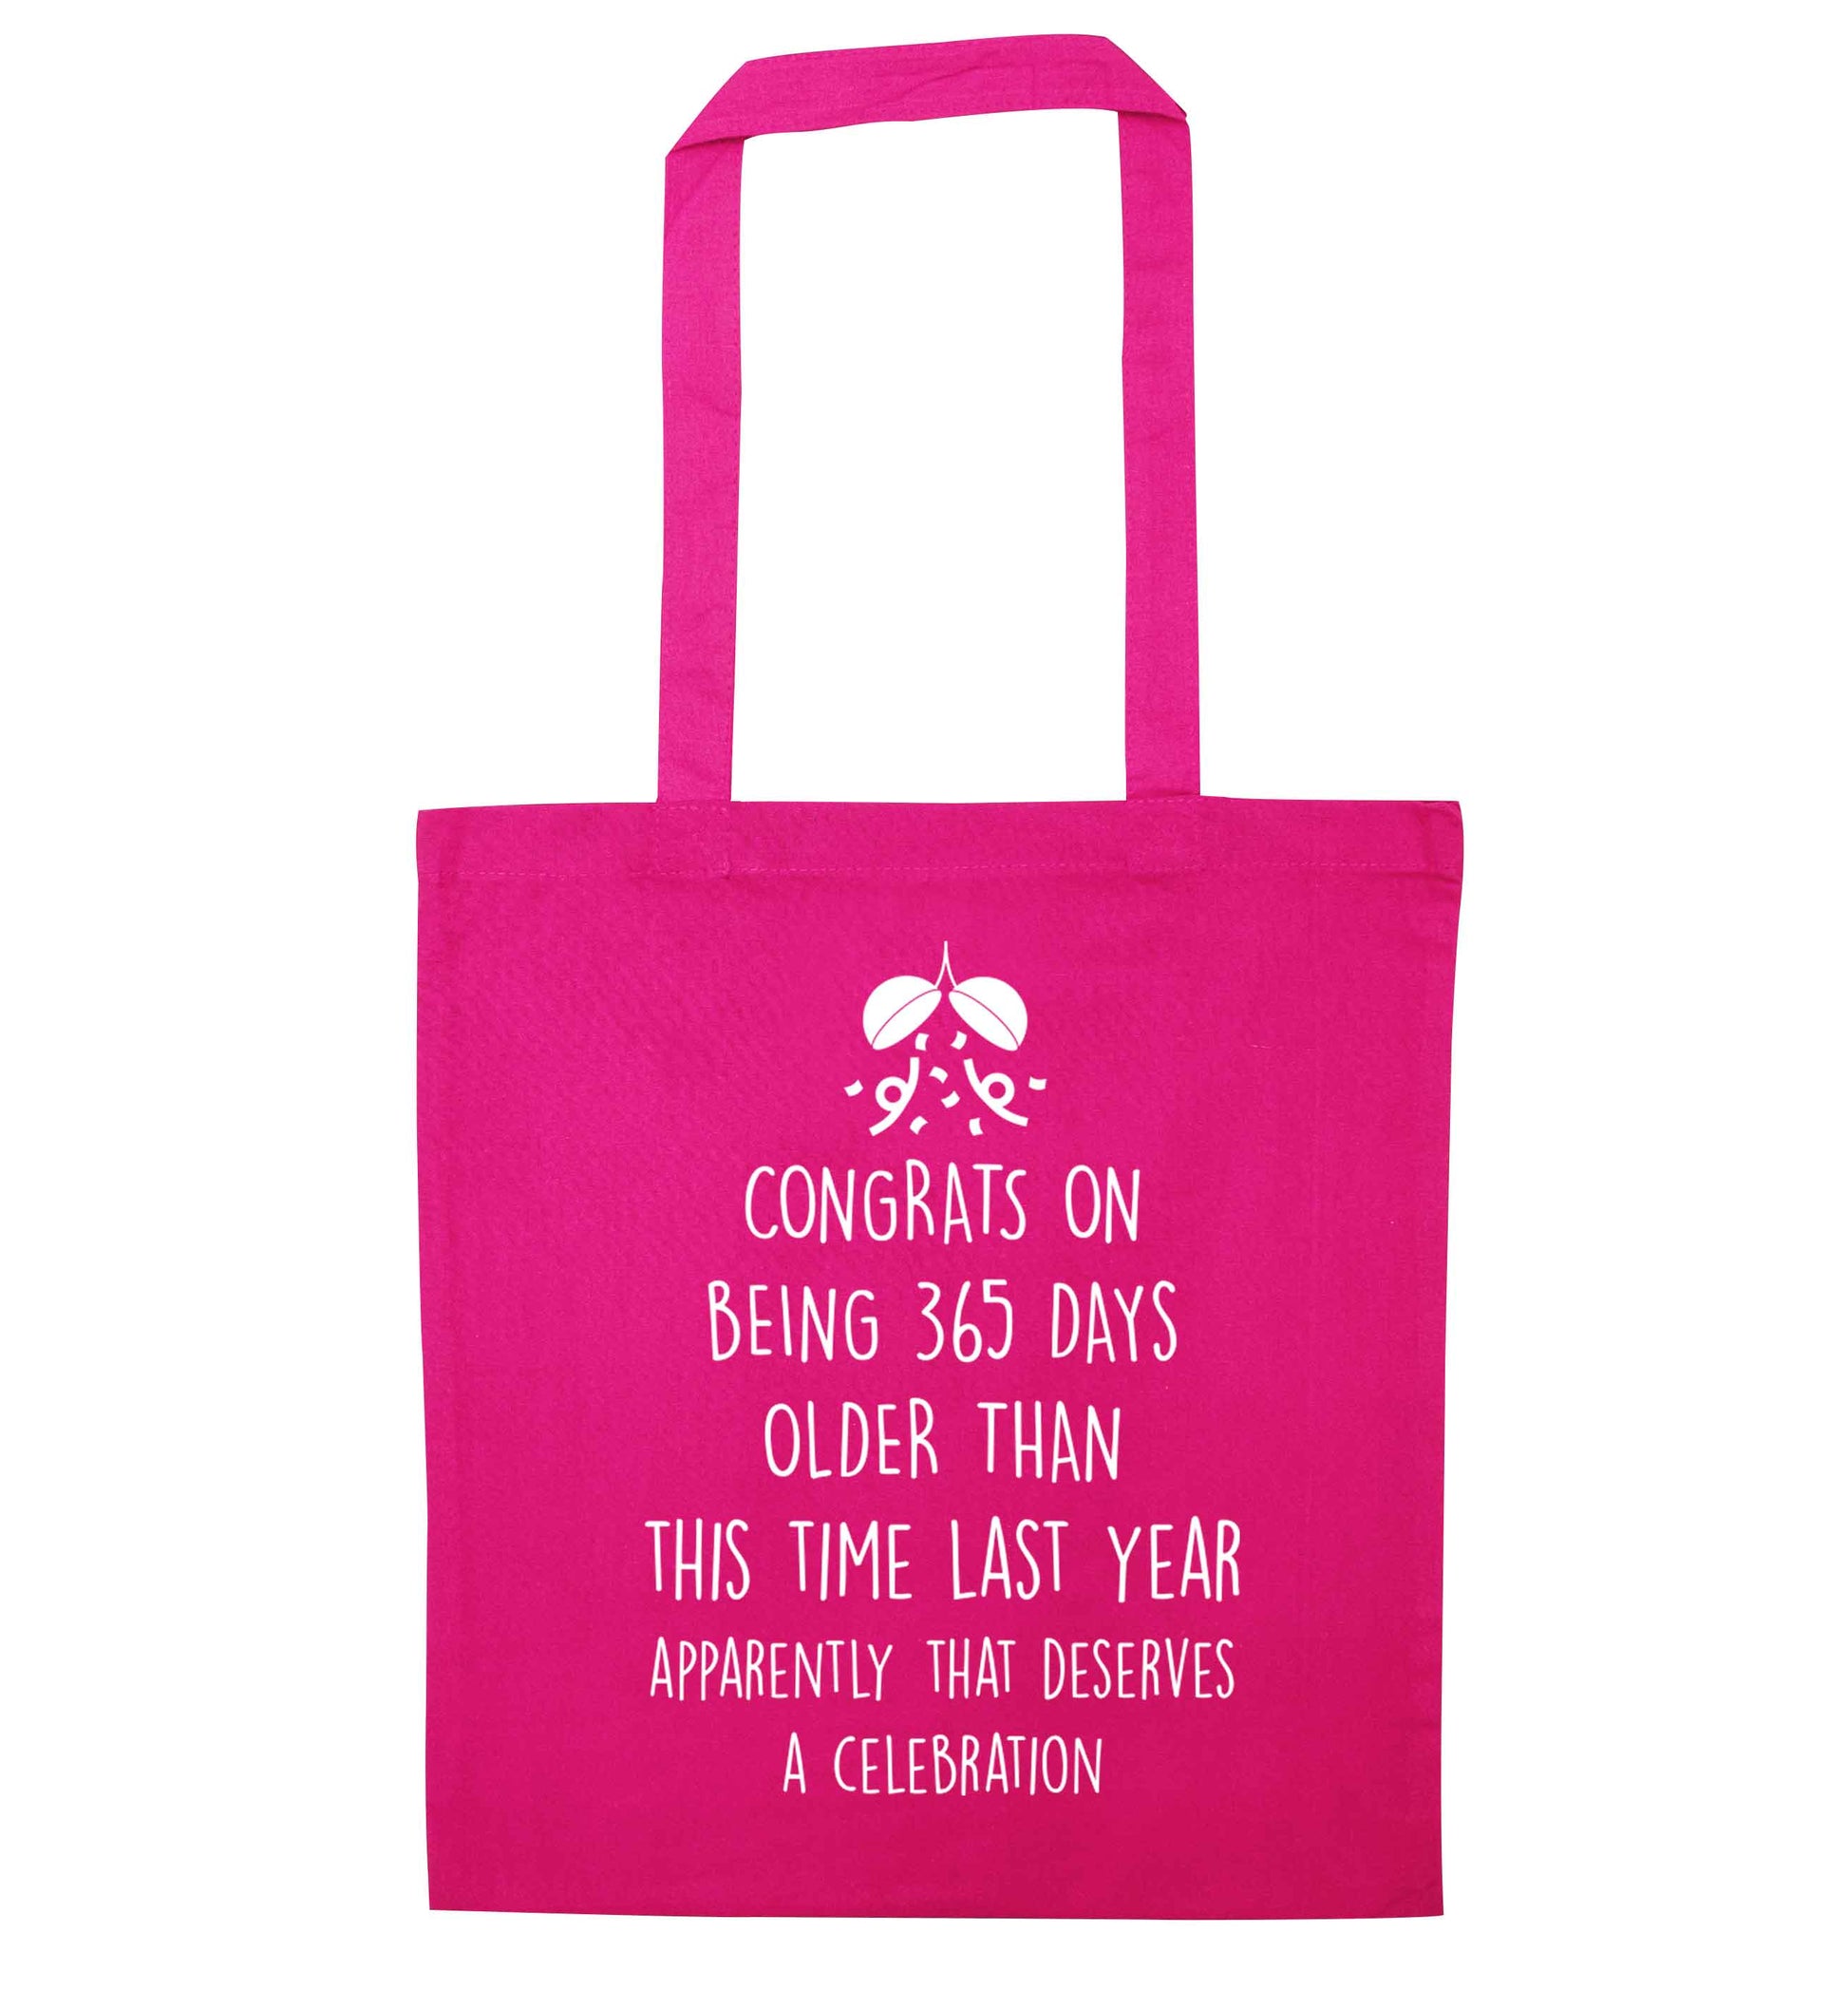 Congrats on being 365 days older than you were this time last year apparently that deserves a celebration pink tote bag